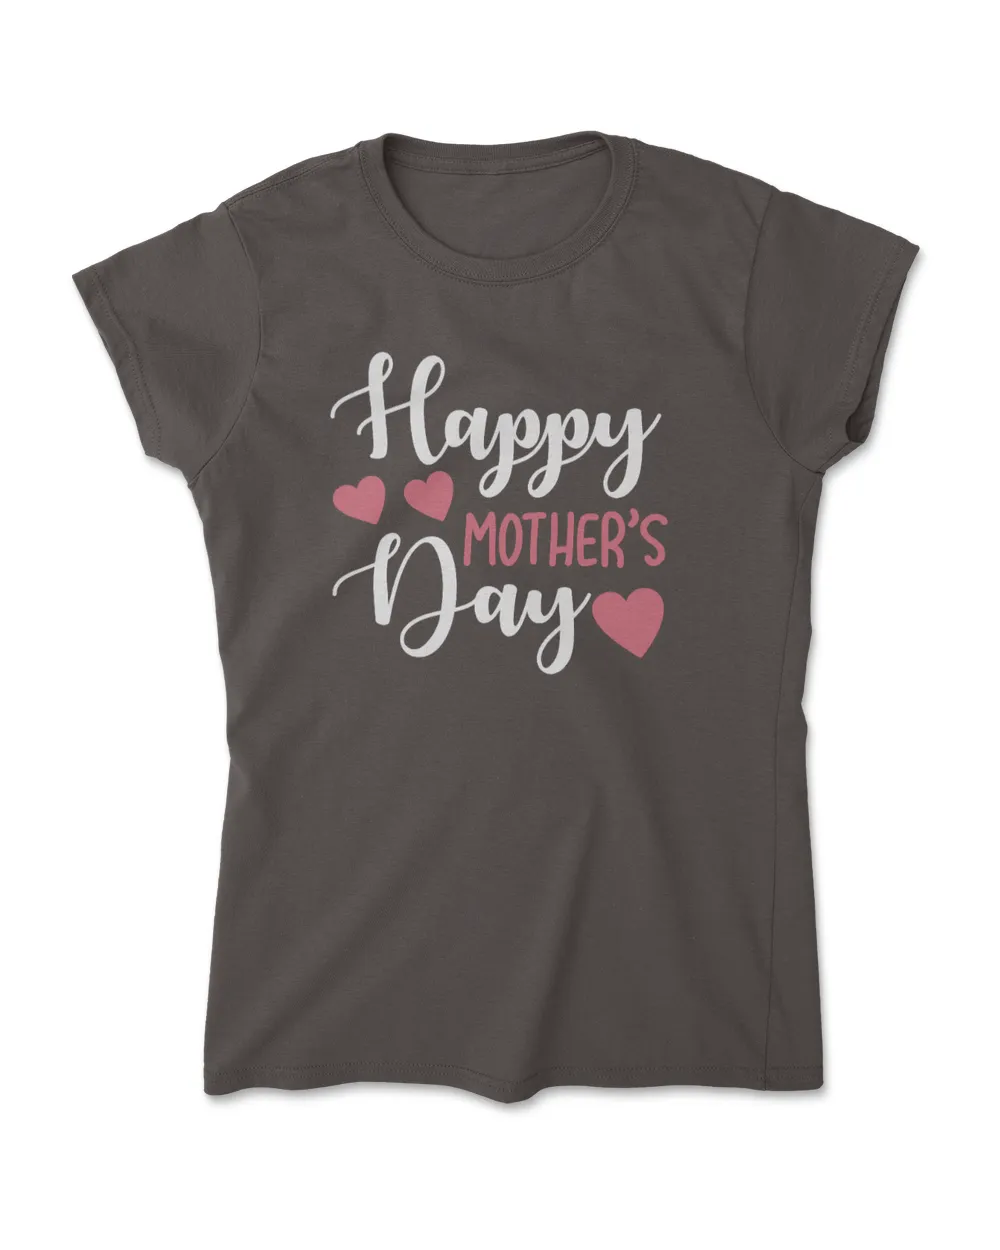 Happy mother's day t shirt